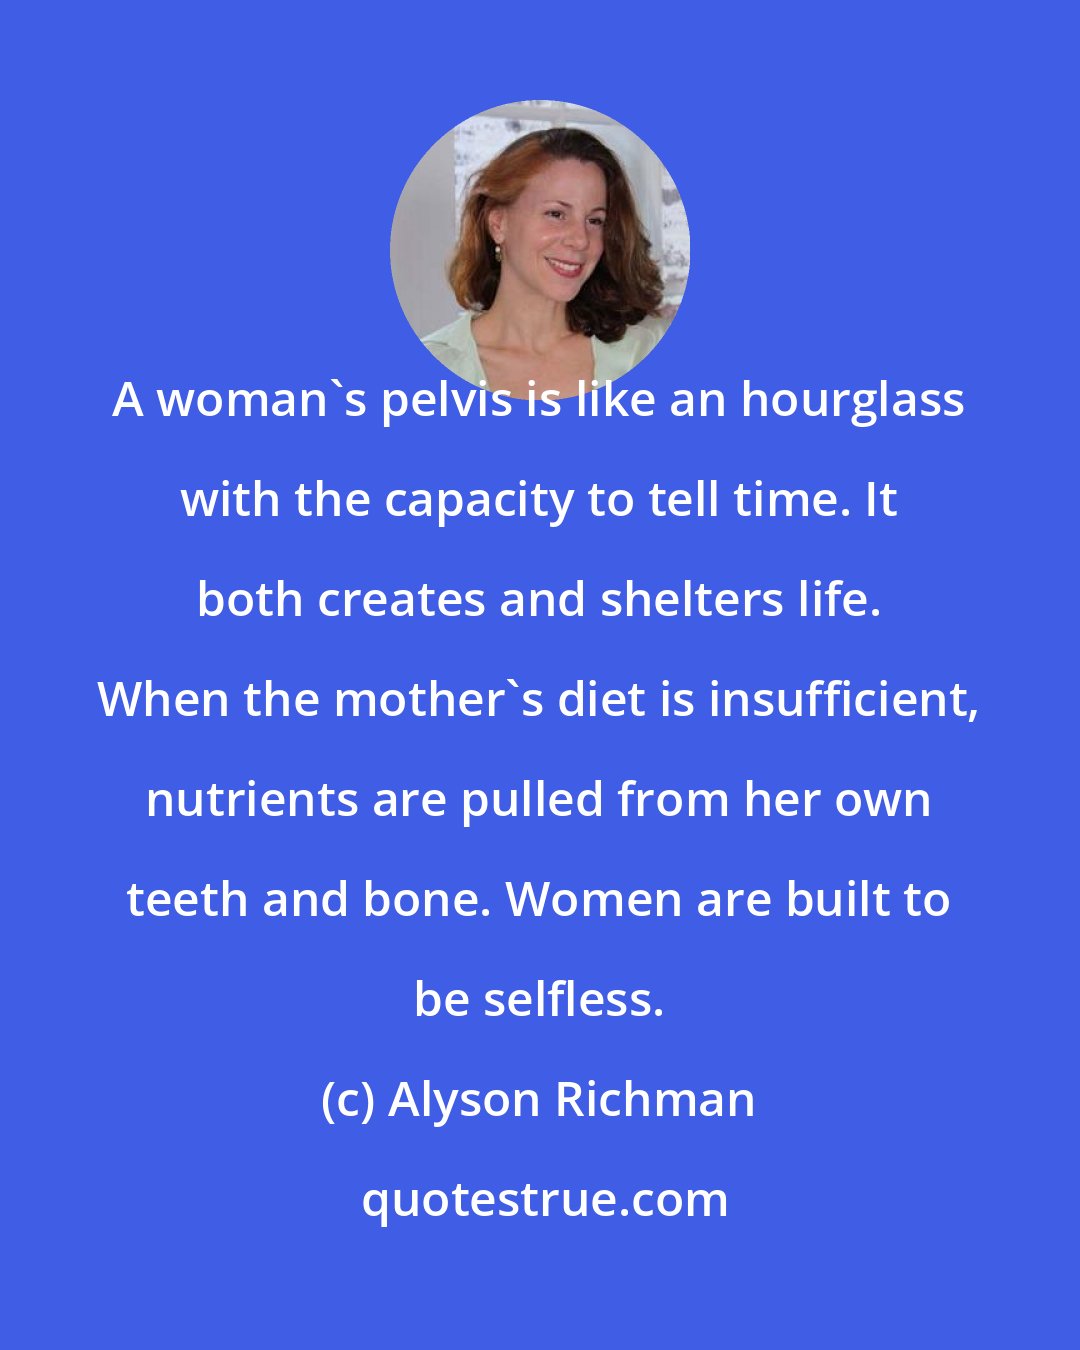 Alyson Richman: A woman's pelvis is like an hourglass with the capacity to tell time. It both creates and shelters life. When the mother's diet is insufficient, nutrients are pulled from her own teeth and bone. Women are built to be selfless.